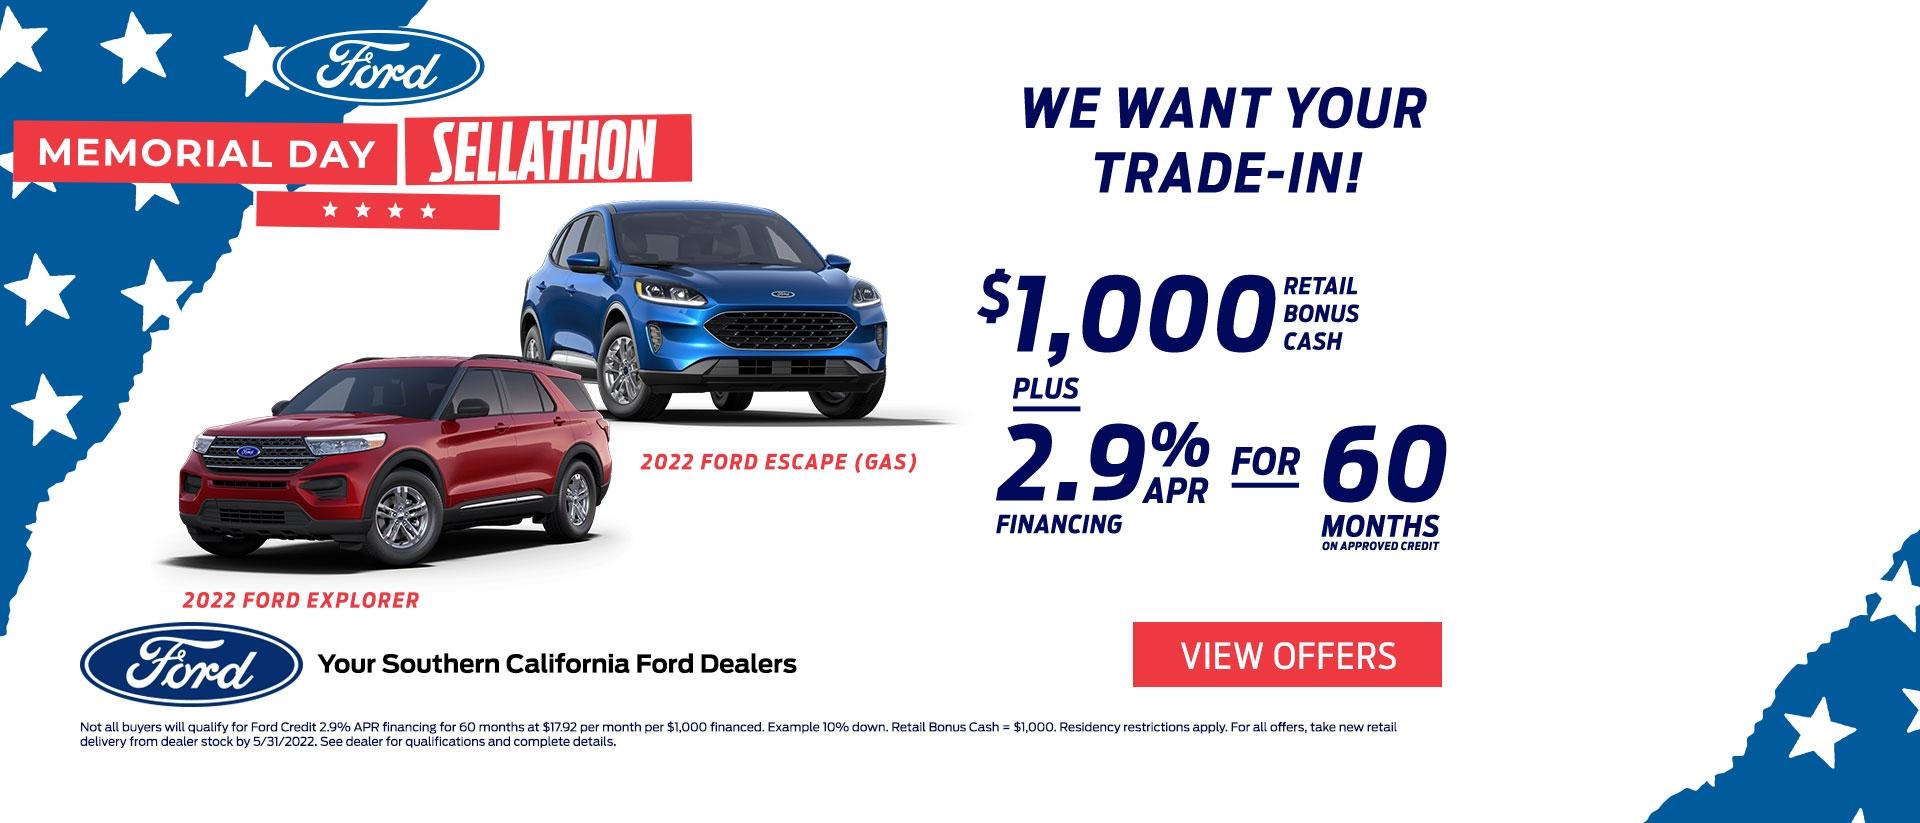 Ford Memorial Day Sellathon | 2022 Ford Explorer &amp; 2022 Ford Escape Gas | Southern California Ford Dealers